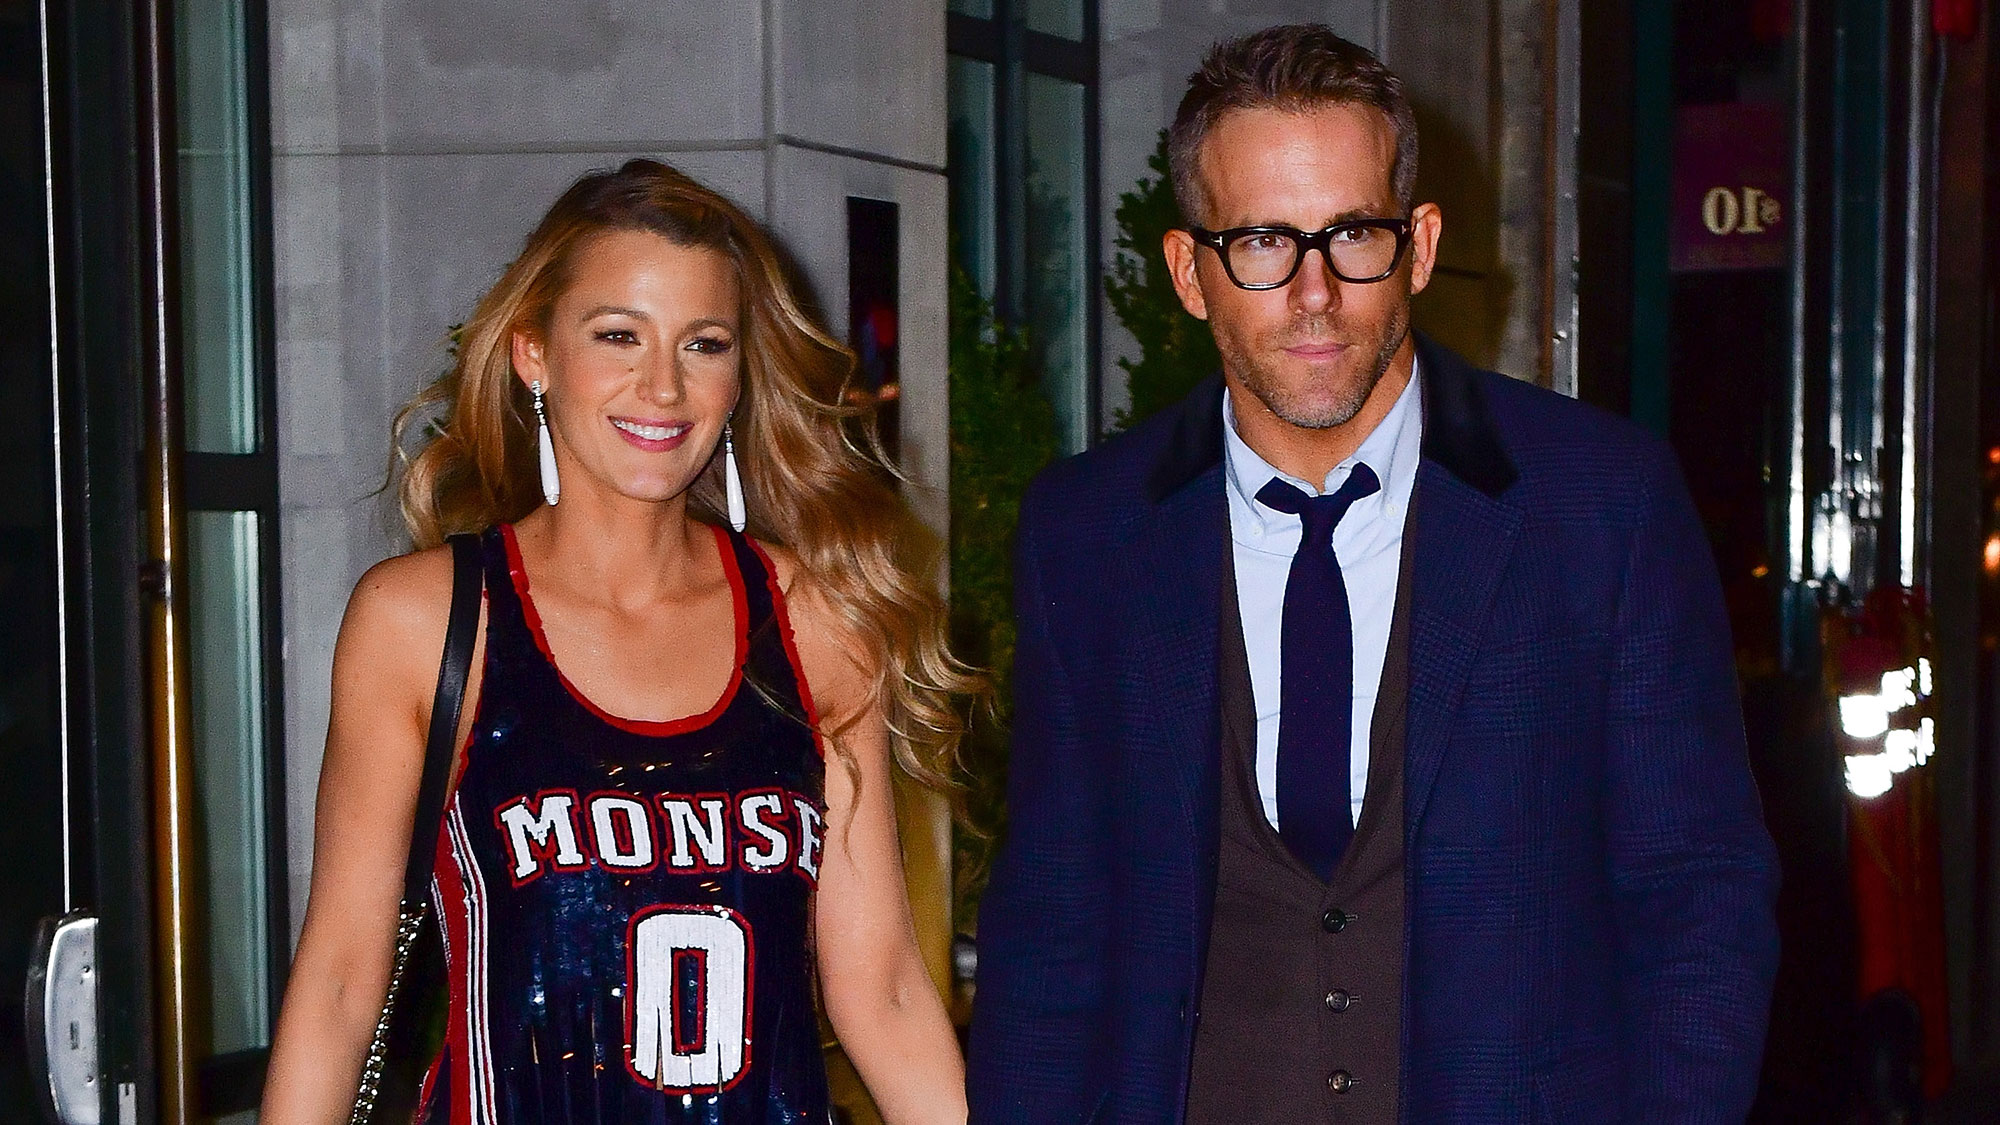 Blake Lively Has a Studio 54 Moment at Michael Kors